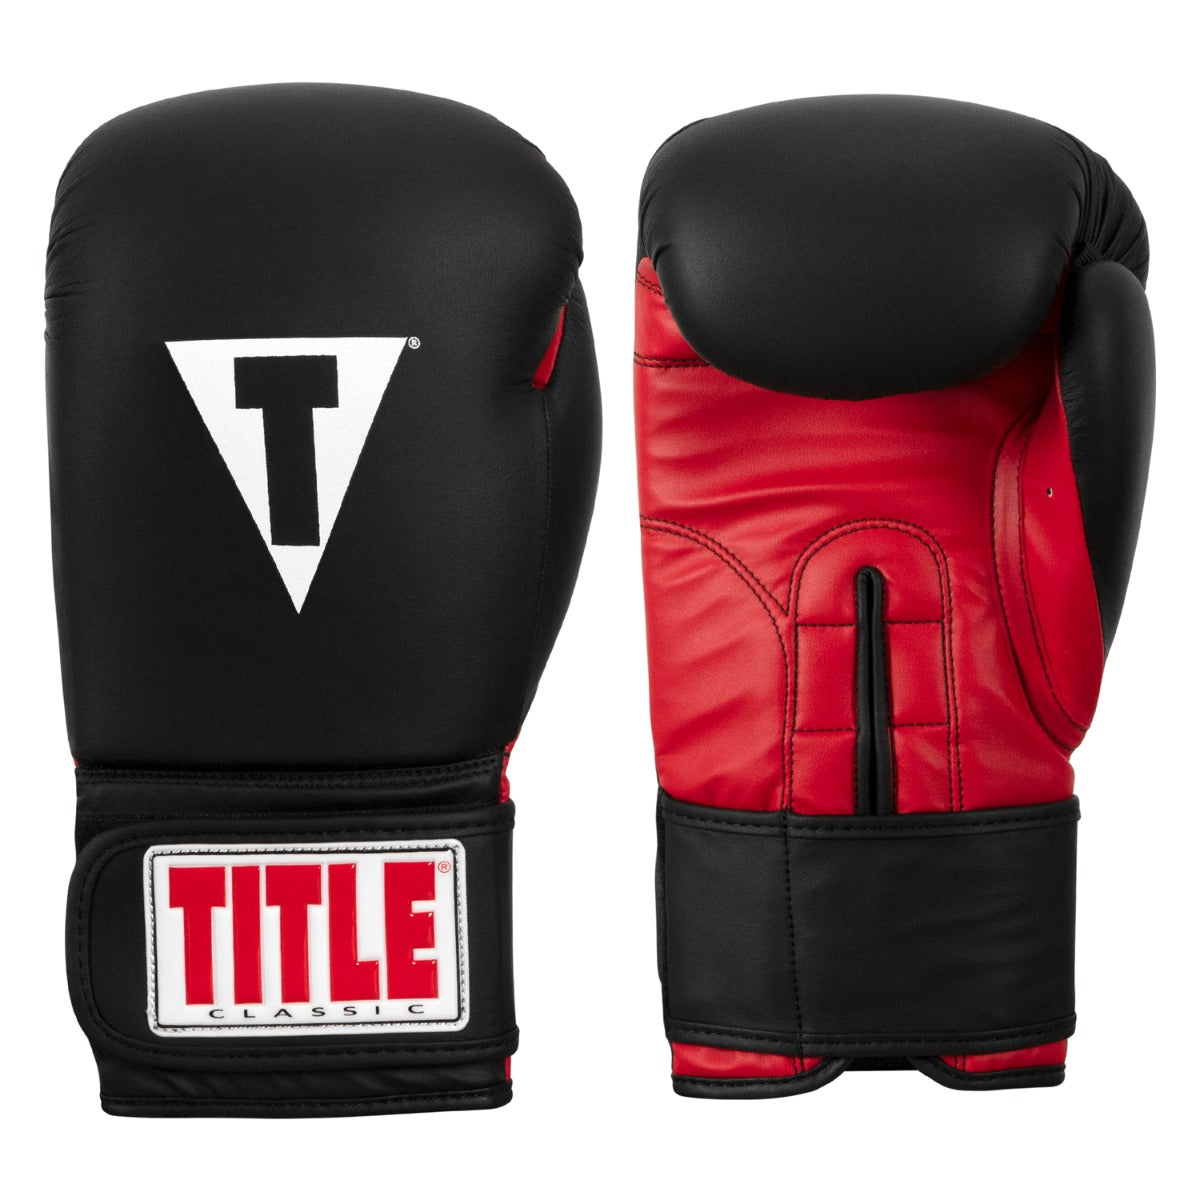 Large NEW Title Boxing Classic Training Boxing Gloves Black/Red 14oz 